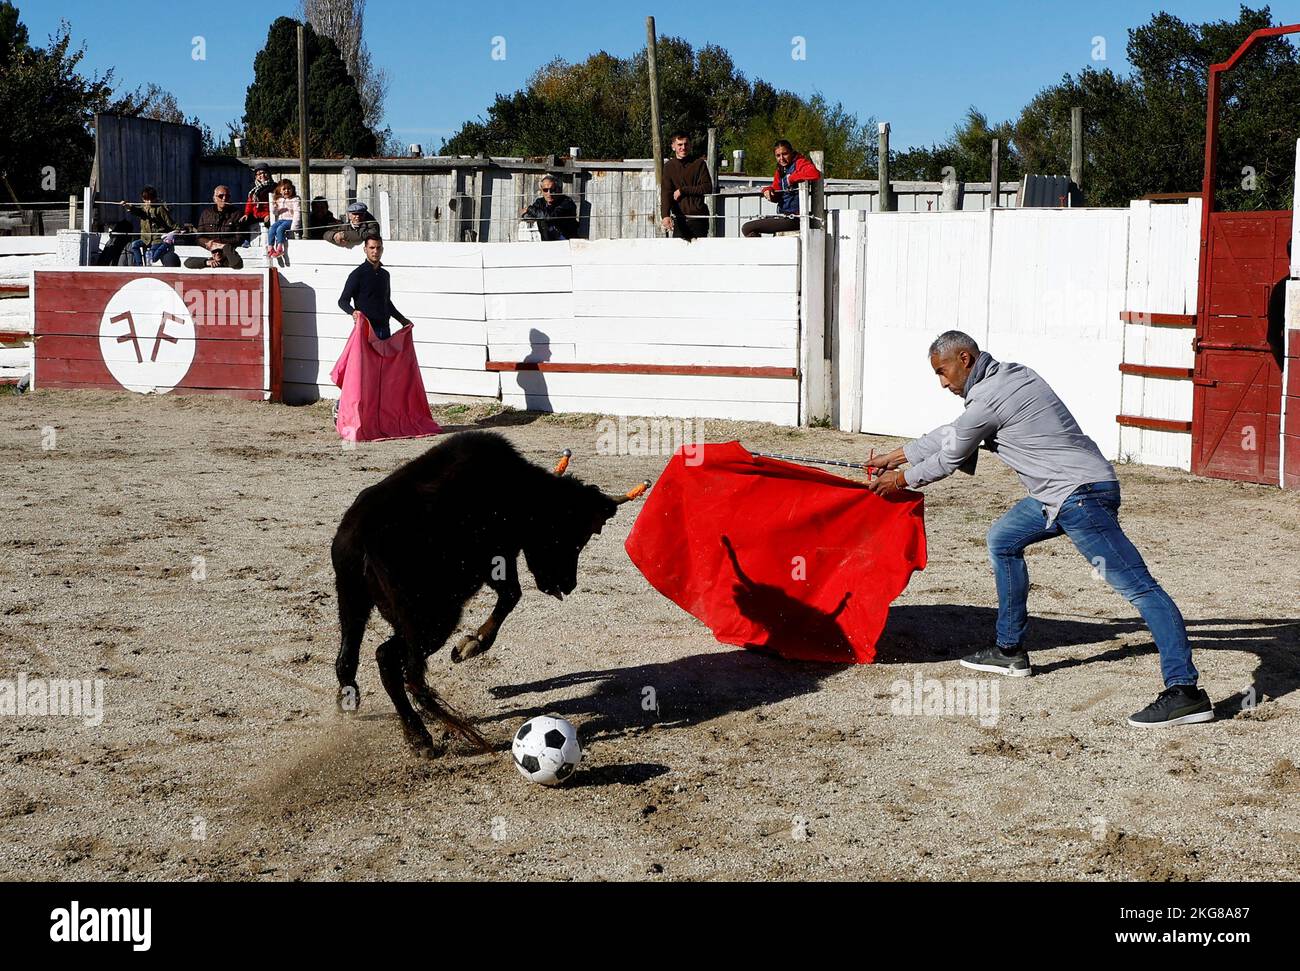 A toreador teacher of the Arles bullfighting school plays with a soccer ball during a bullfight show at the Monumental de Gimeaux arena in Arles, France, November 20, 2022.  REUTERS/Eric Gaillard Stock Photo